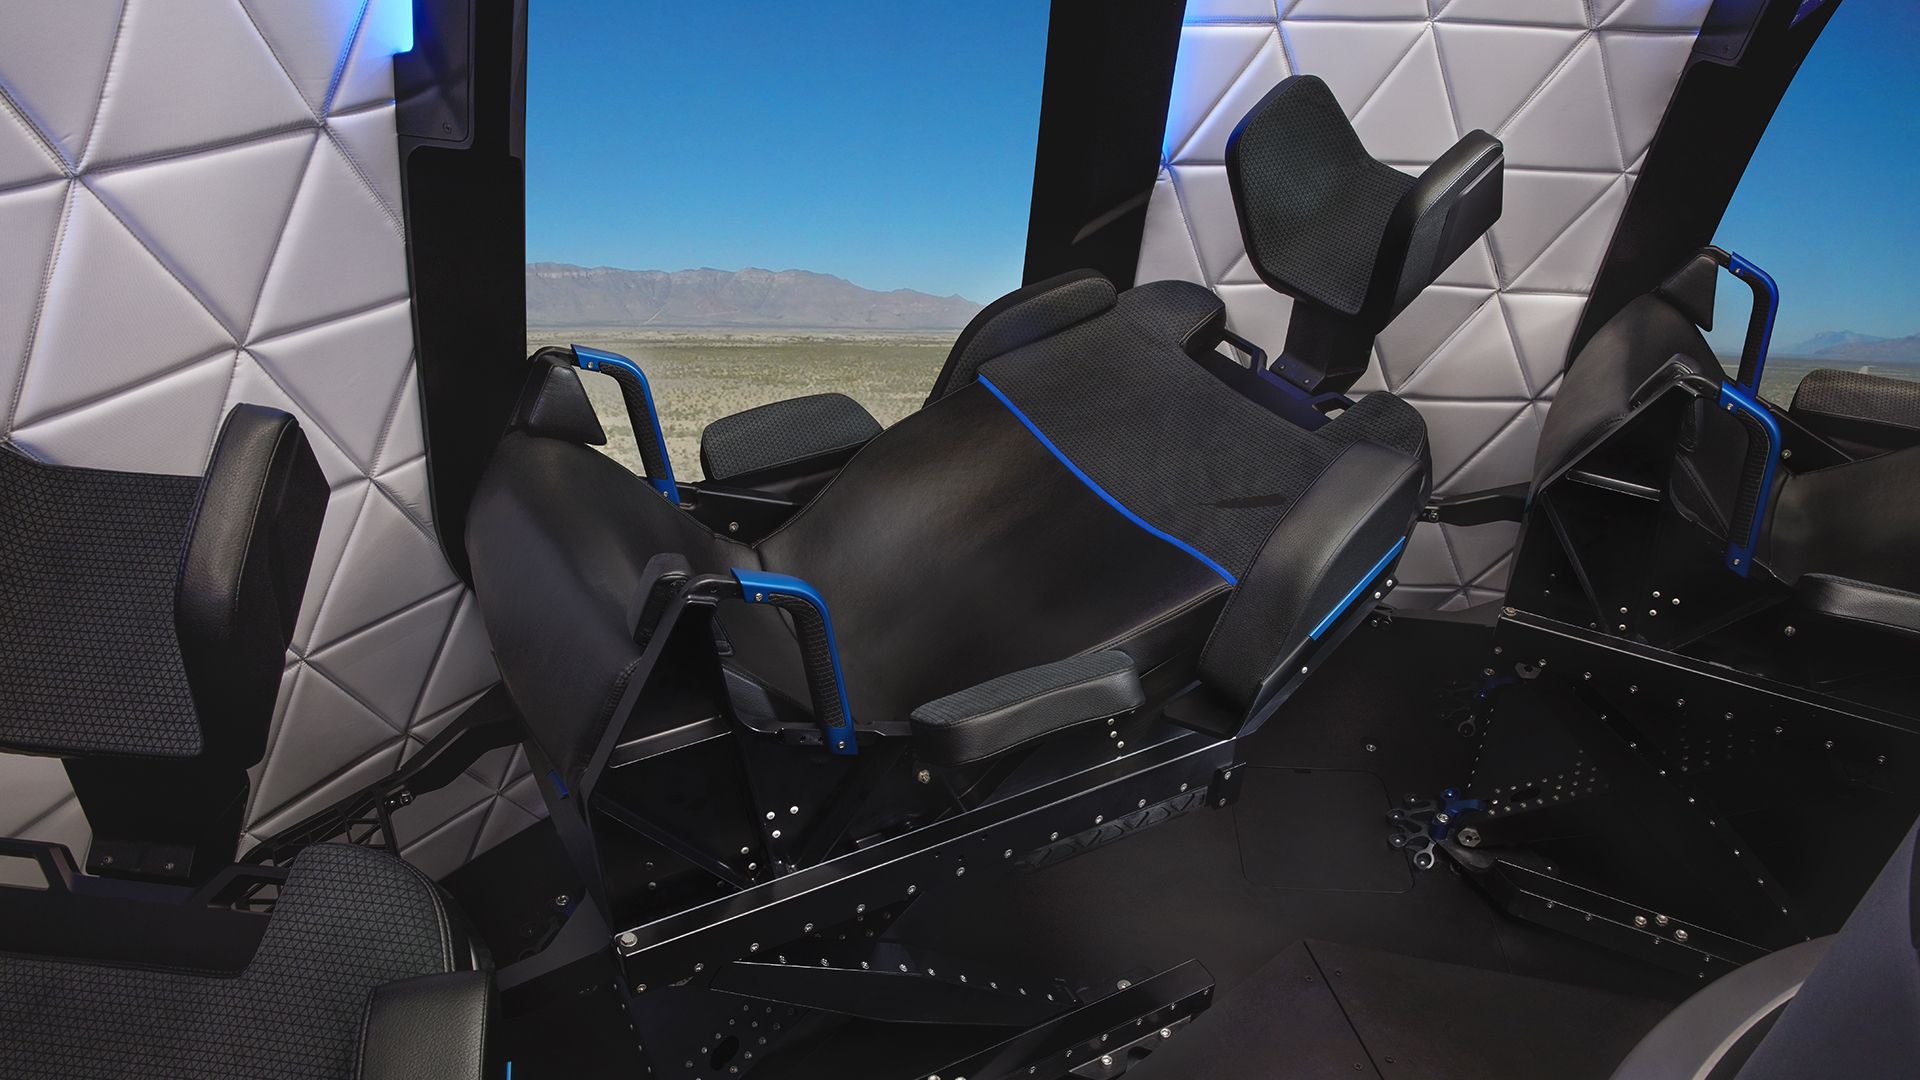 A seat inside of a capsule with a view of mountains out the window